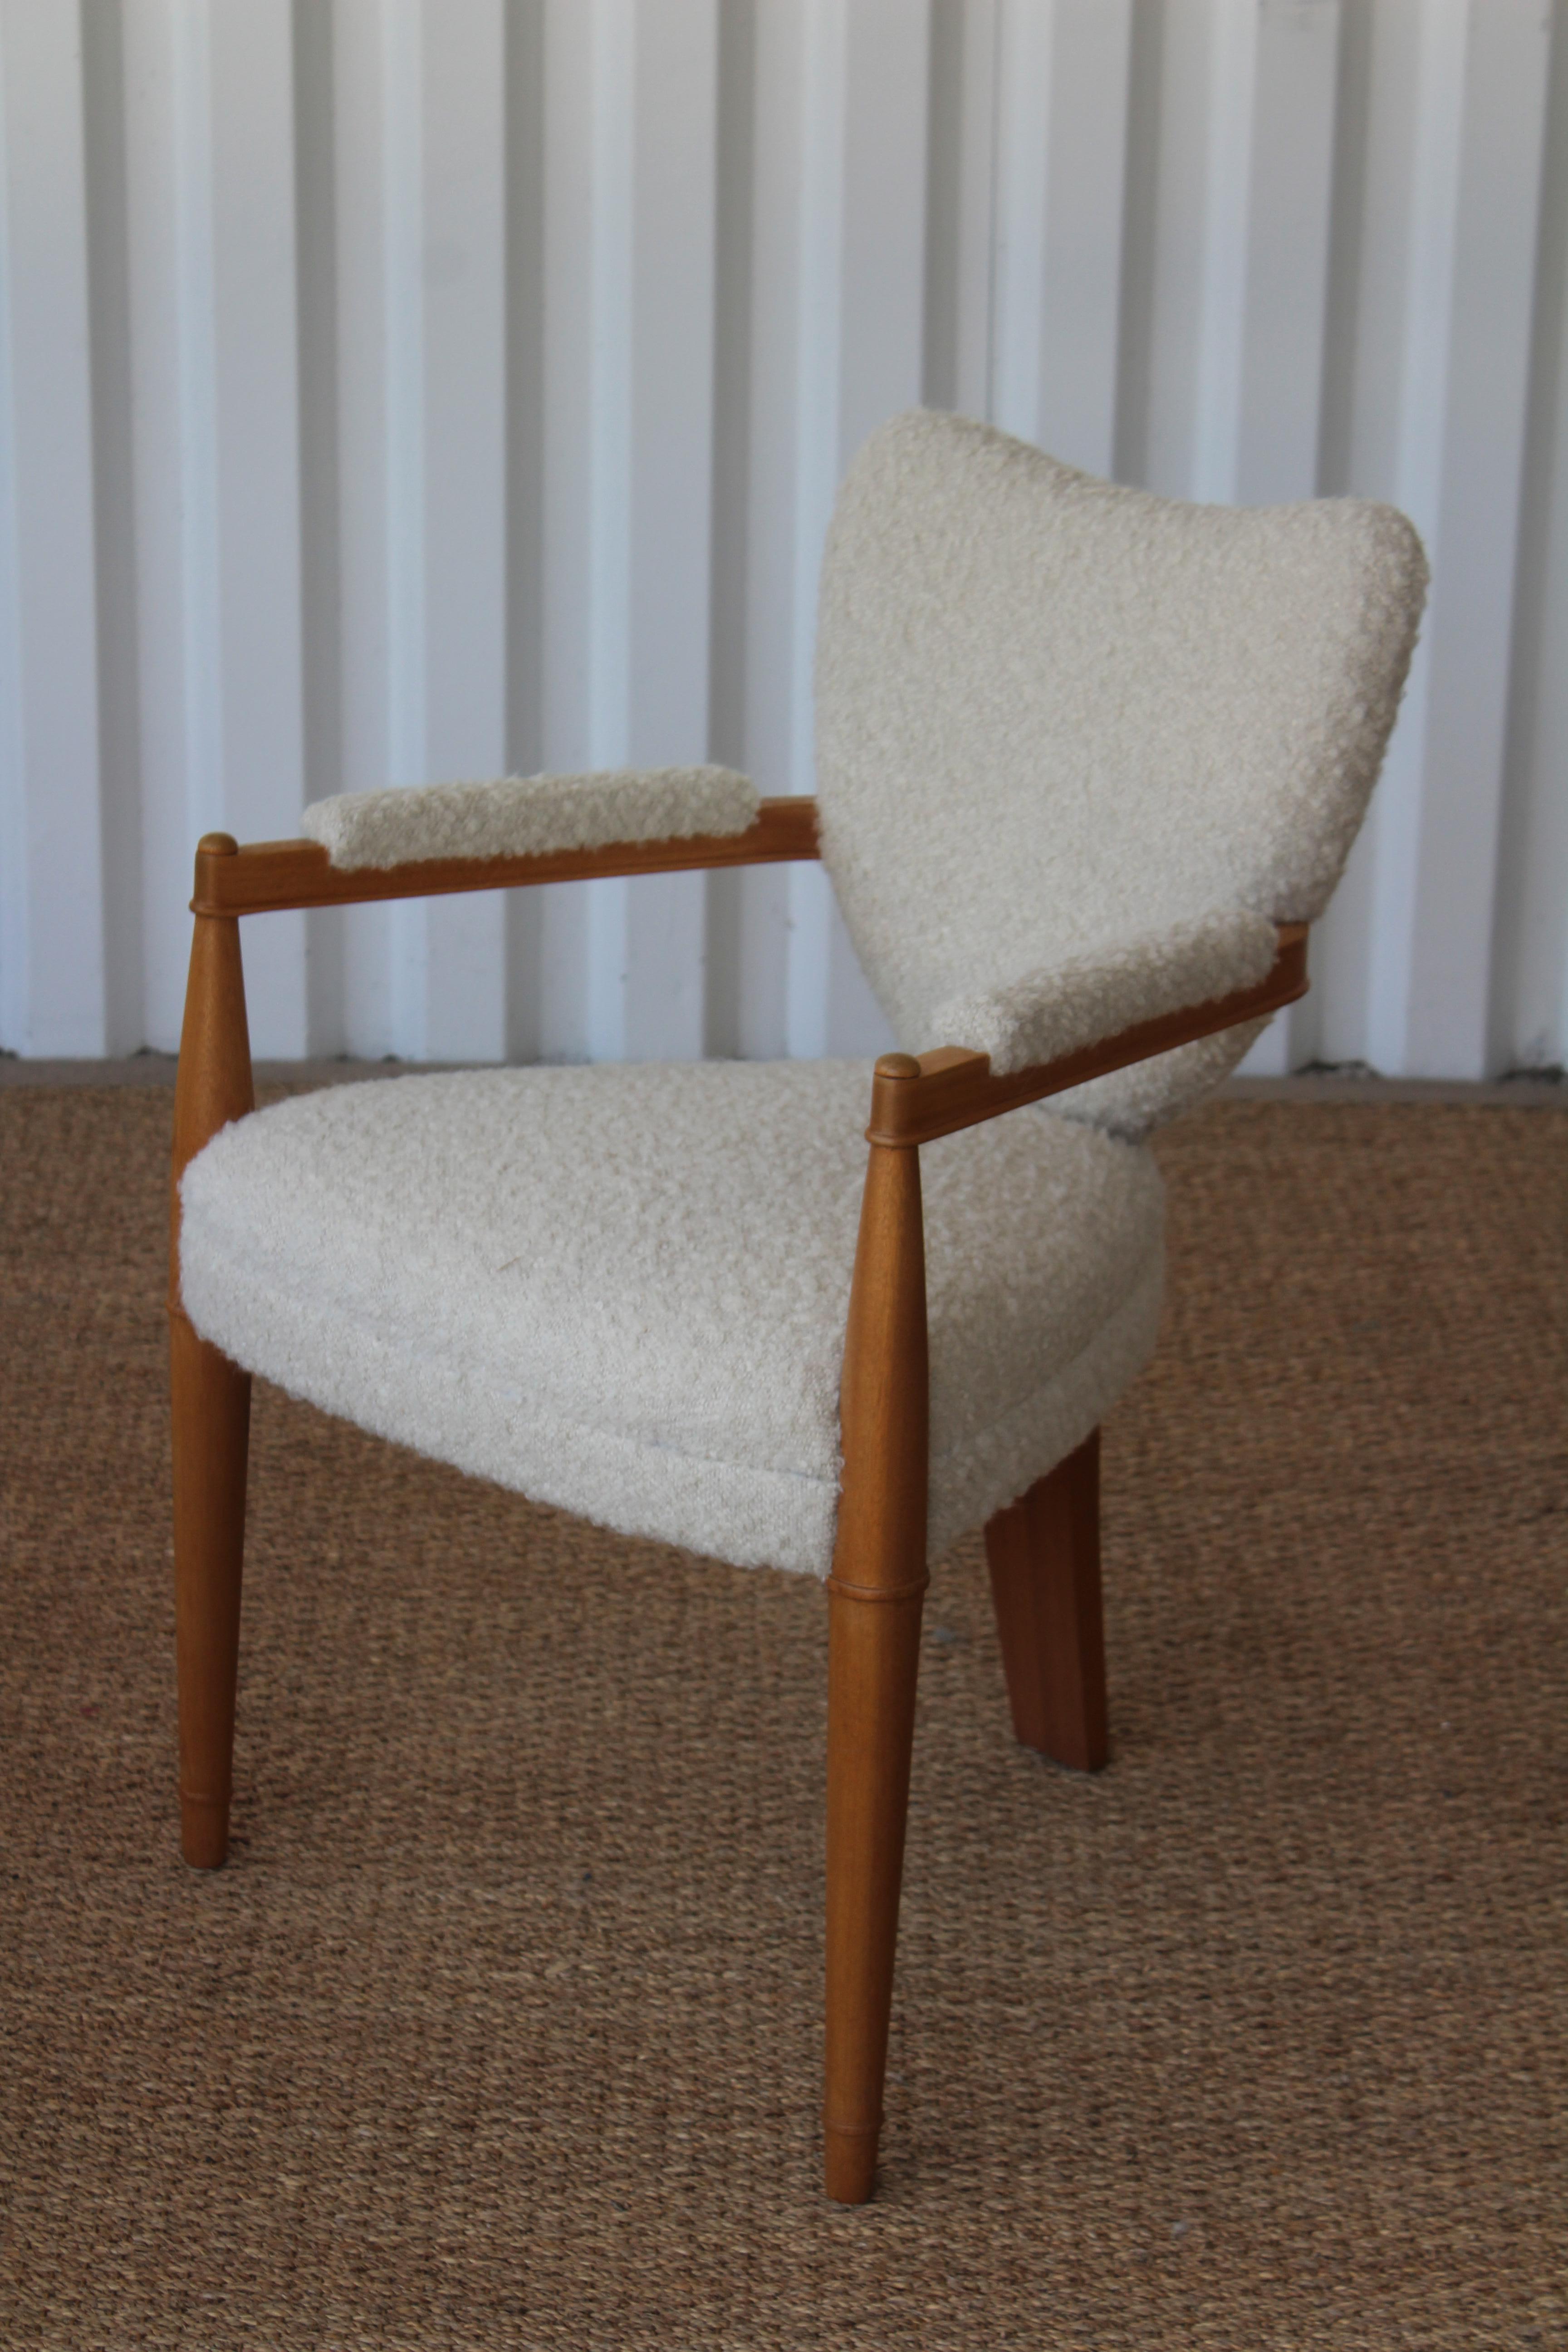 Vintage 1940s three legged armchair. This chair has been restored with new alpaca wool upholstery and a refinished oak frame. Armheight is 24.5 inches.